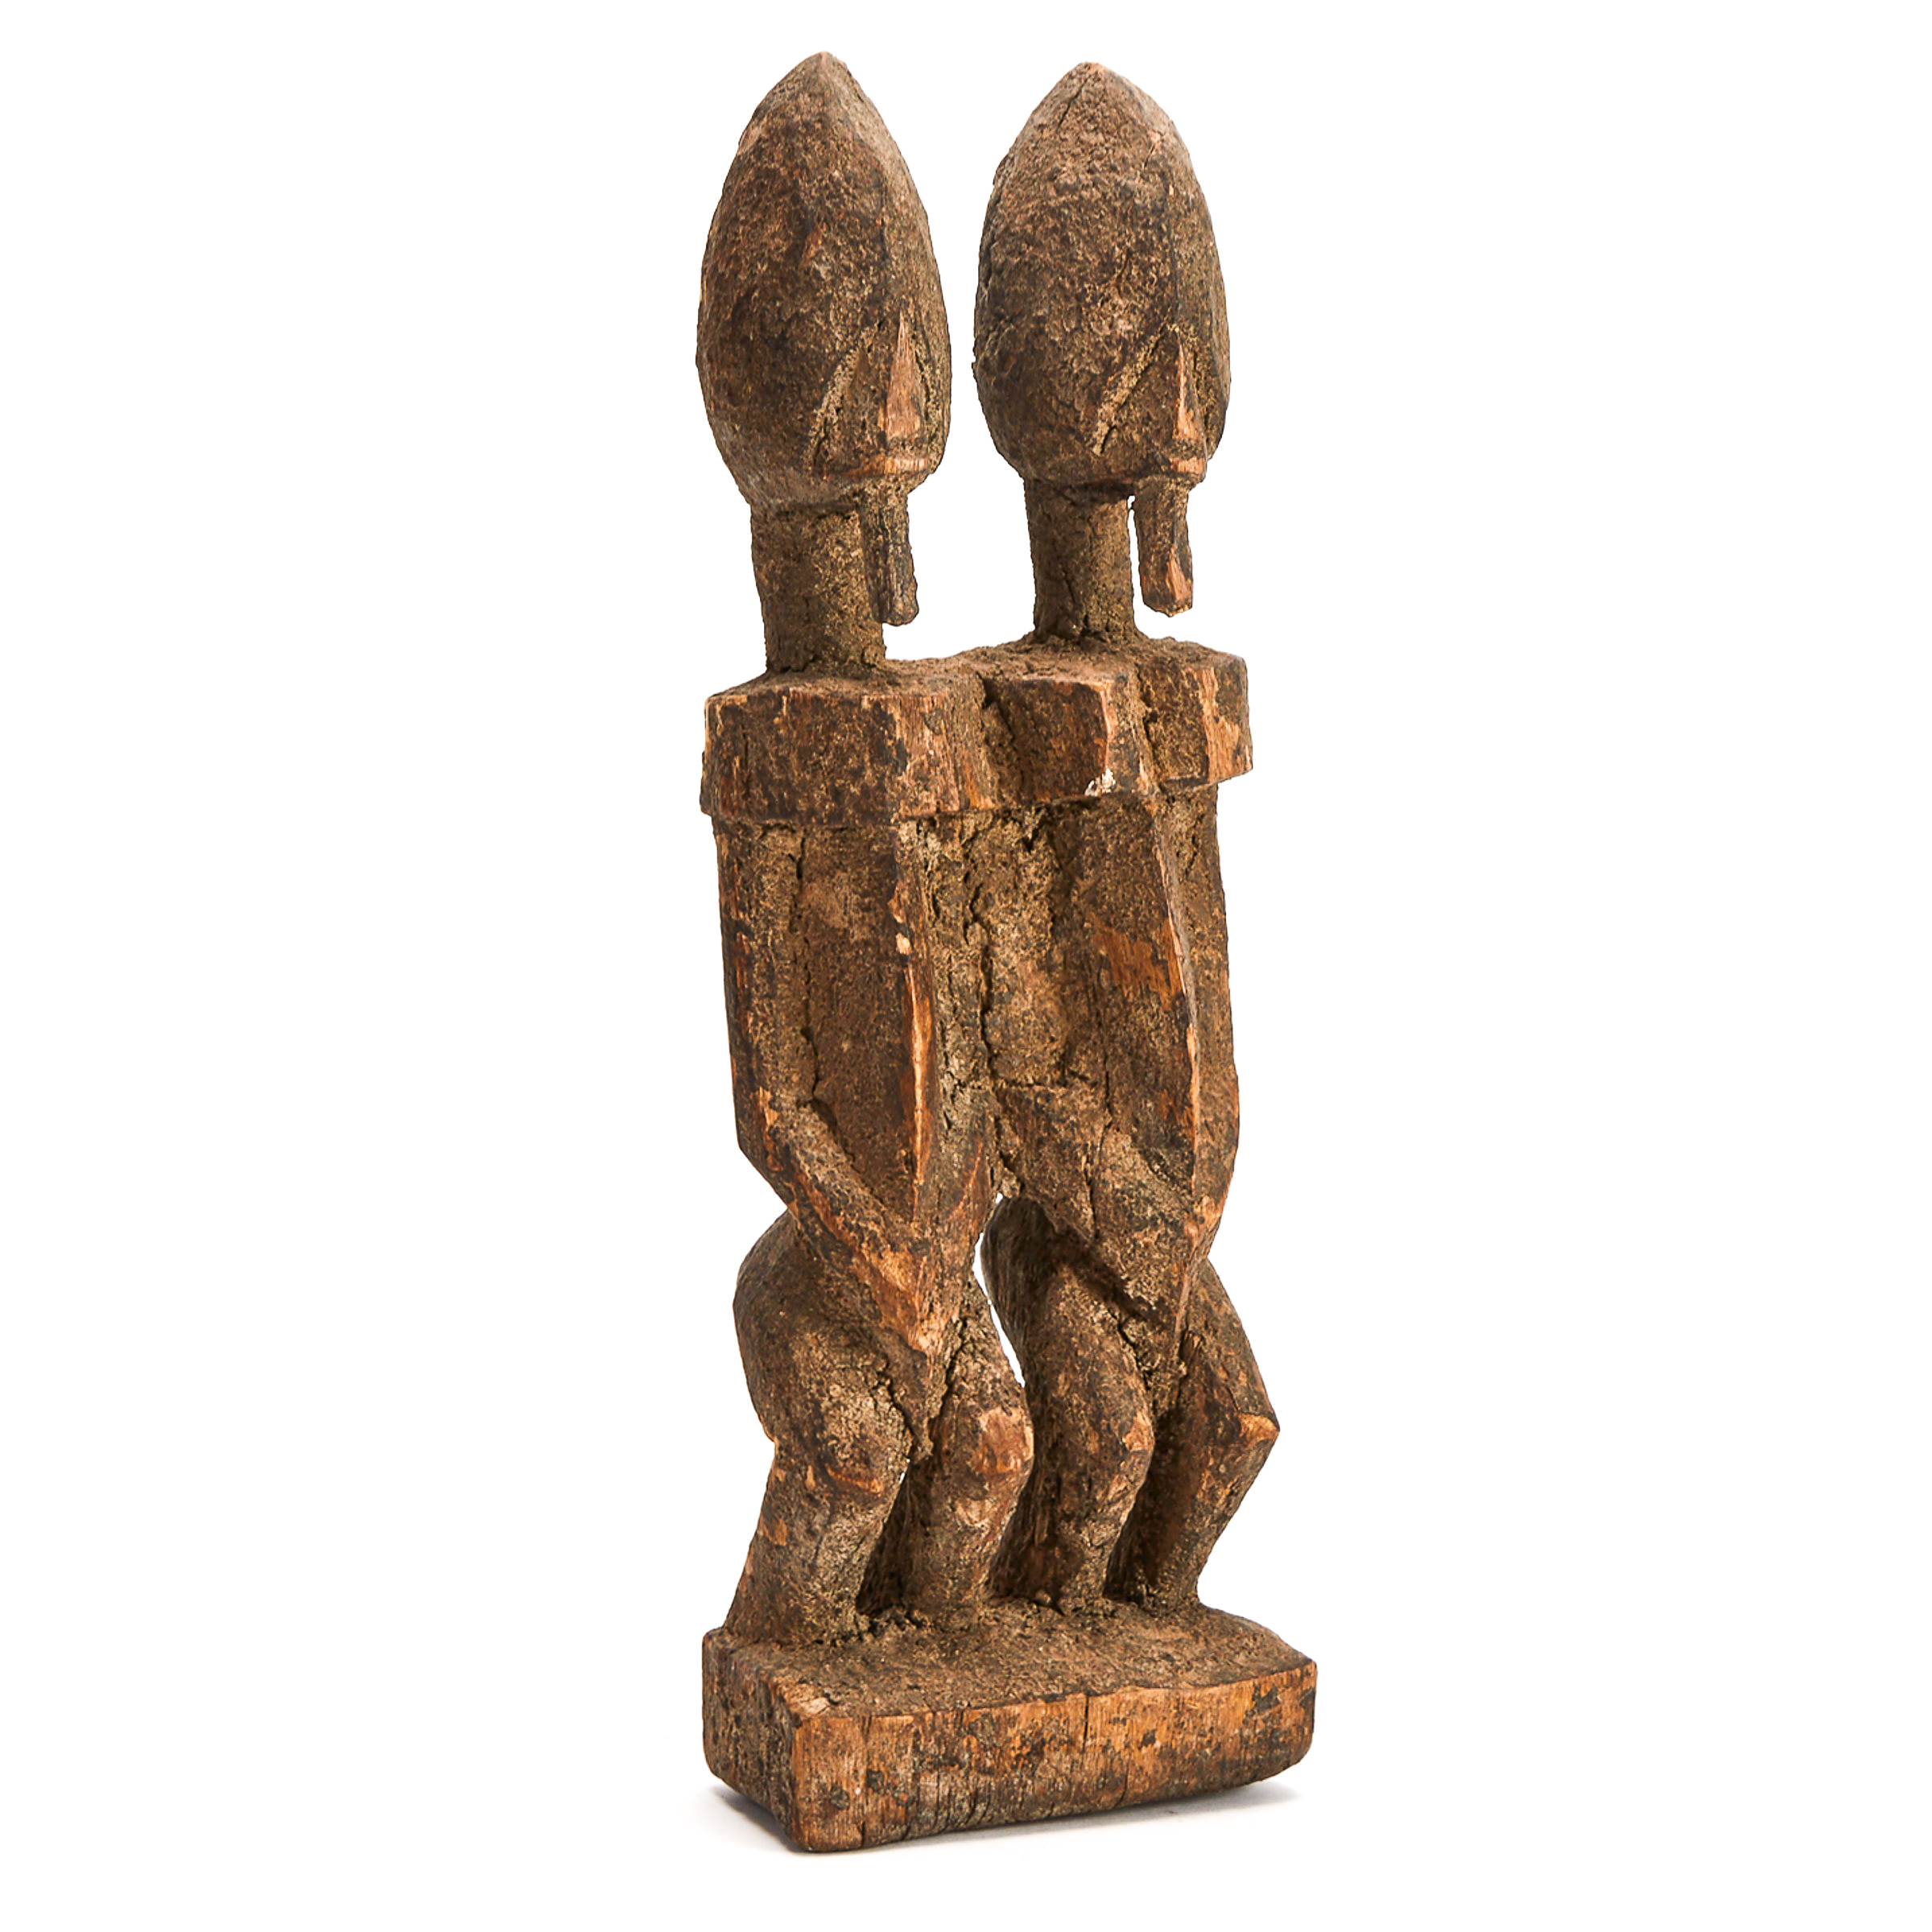 Dogon Male and Female Ancestral Group, early to mid 20th century, Mali, West Africa